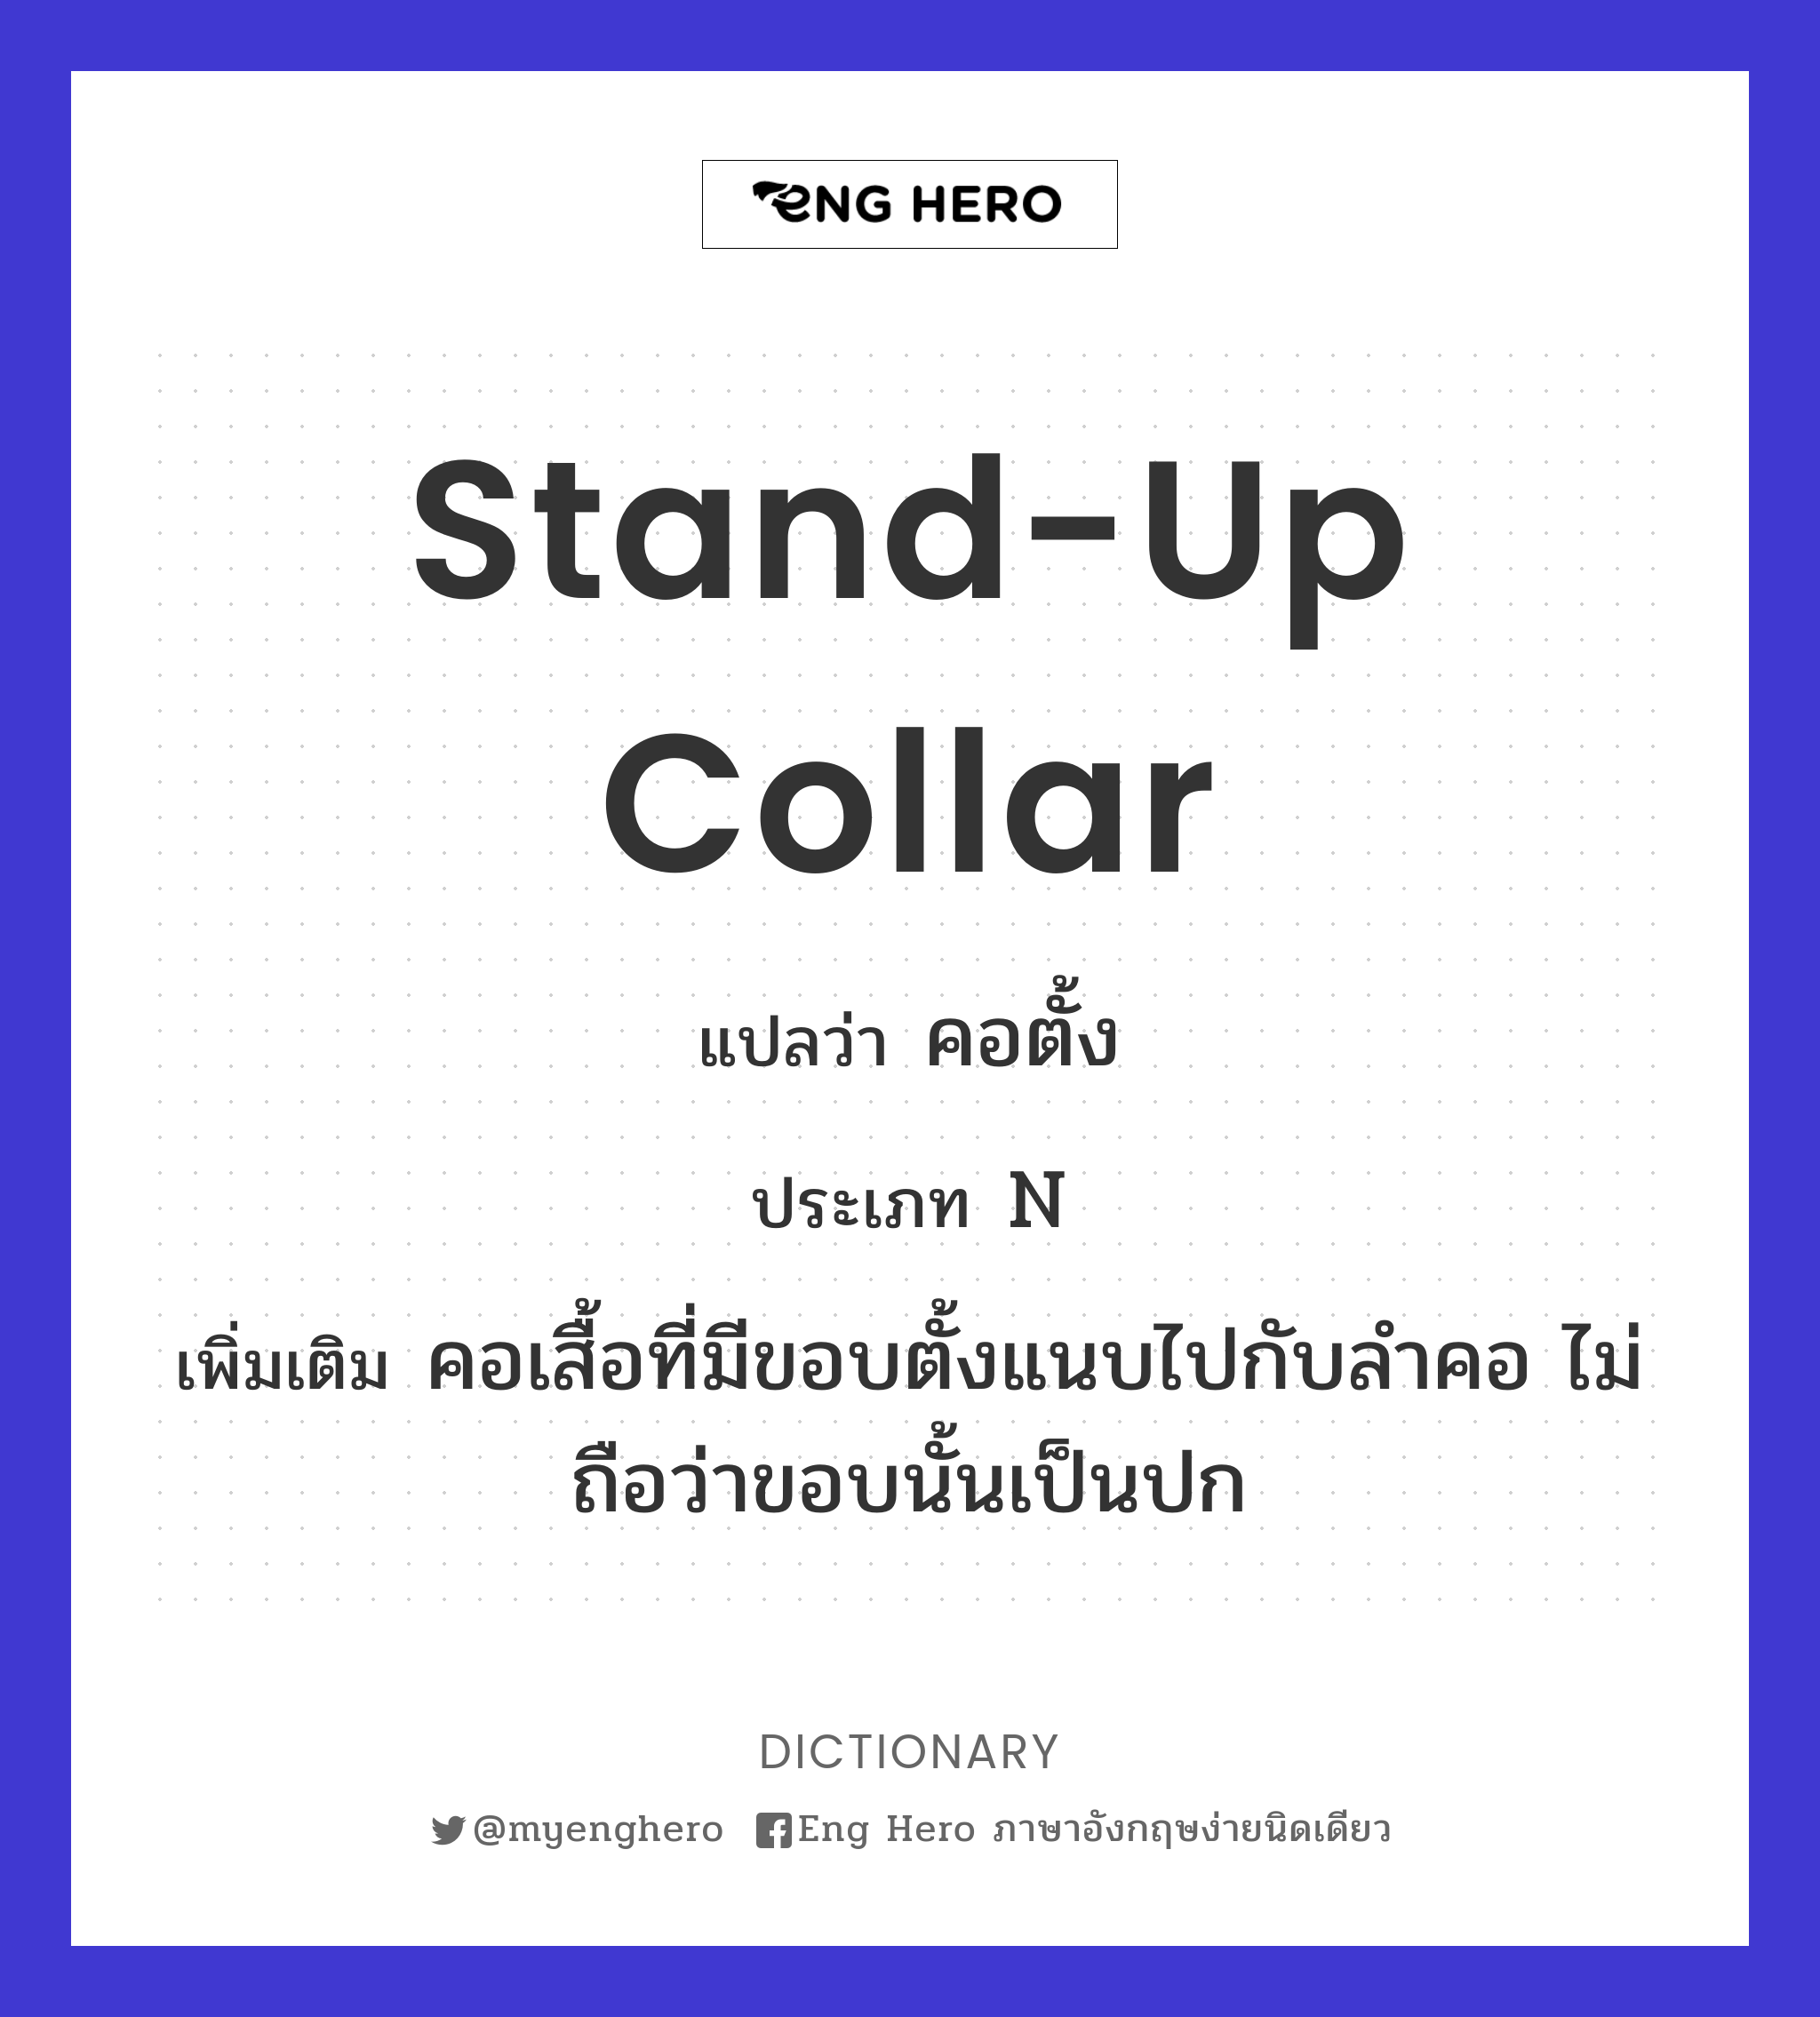 stand-up collar